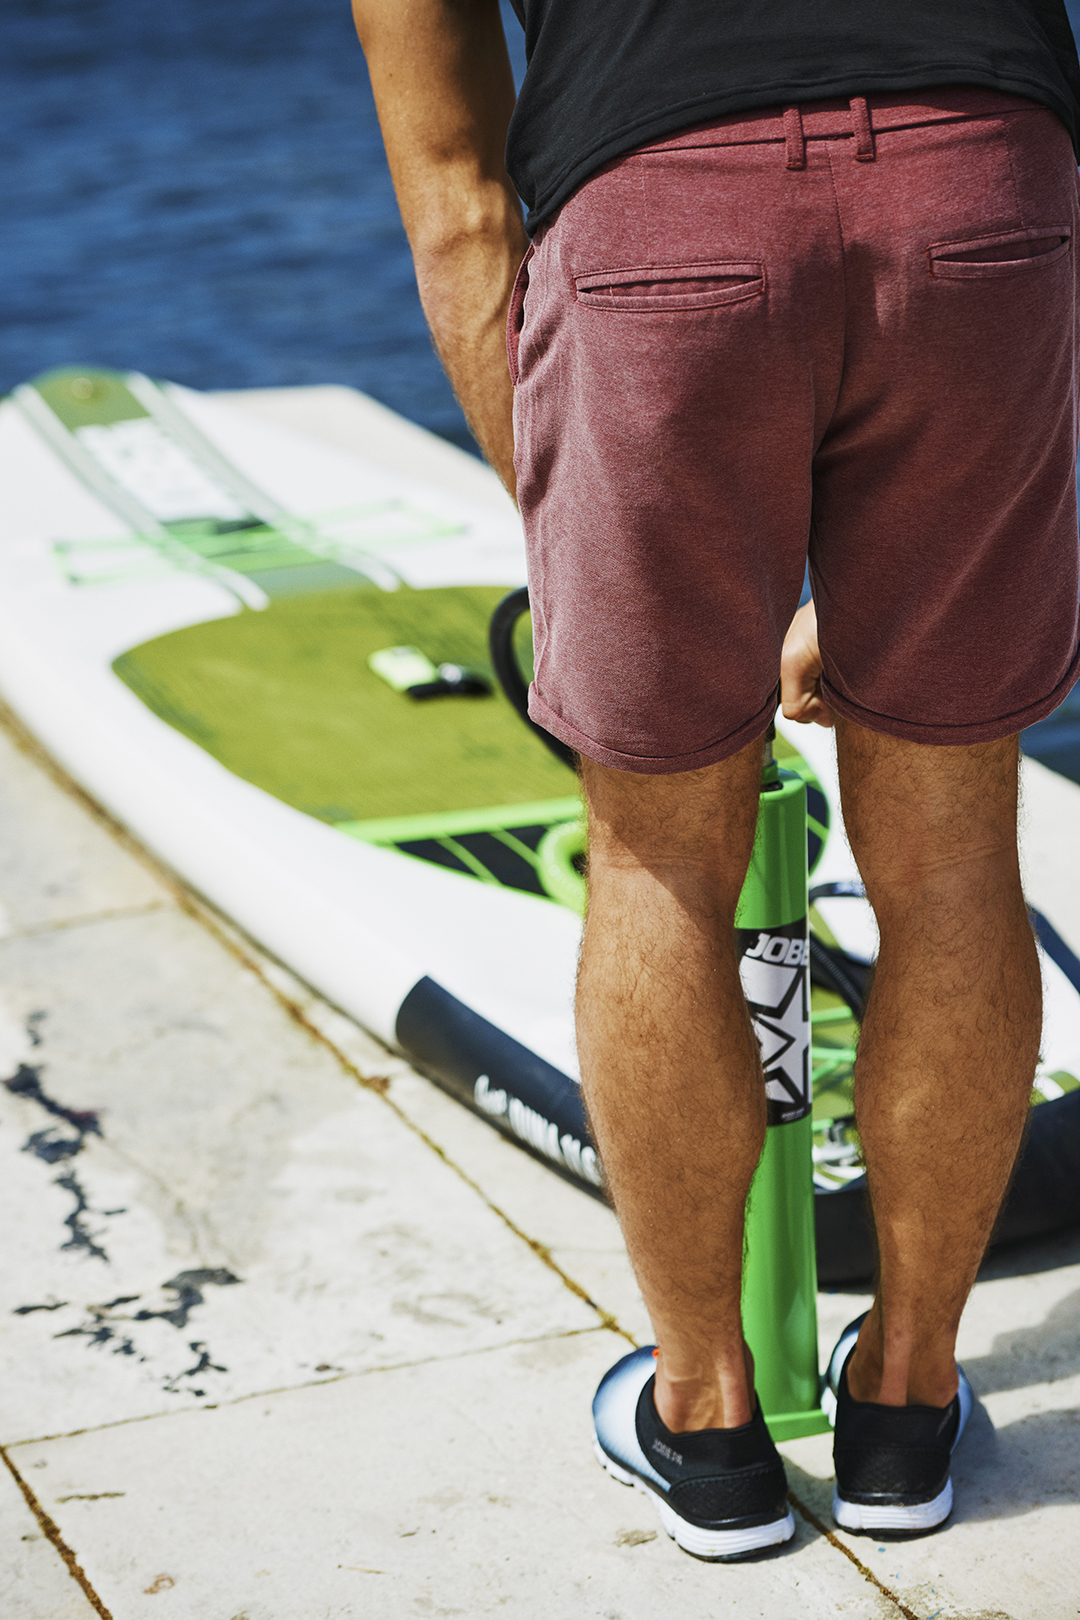 Stand on your SUP in less than 10 minutes